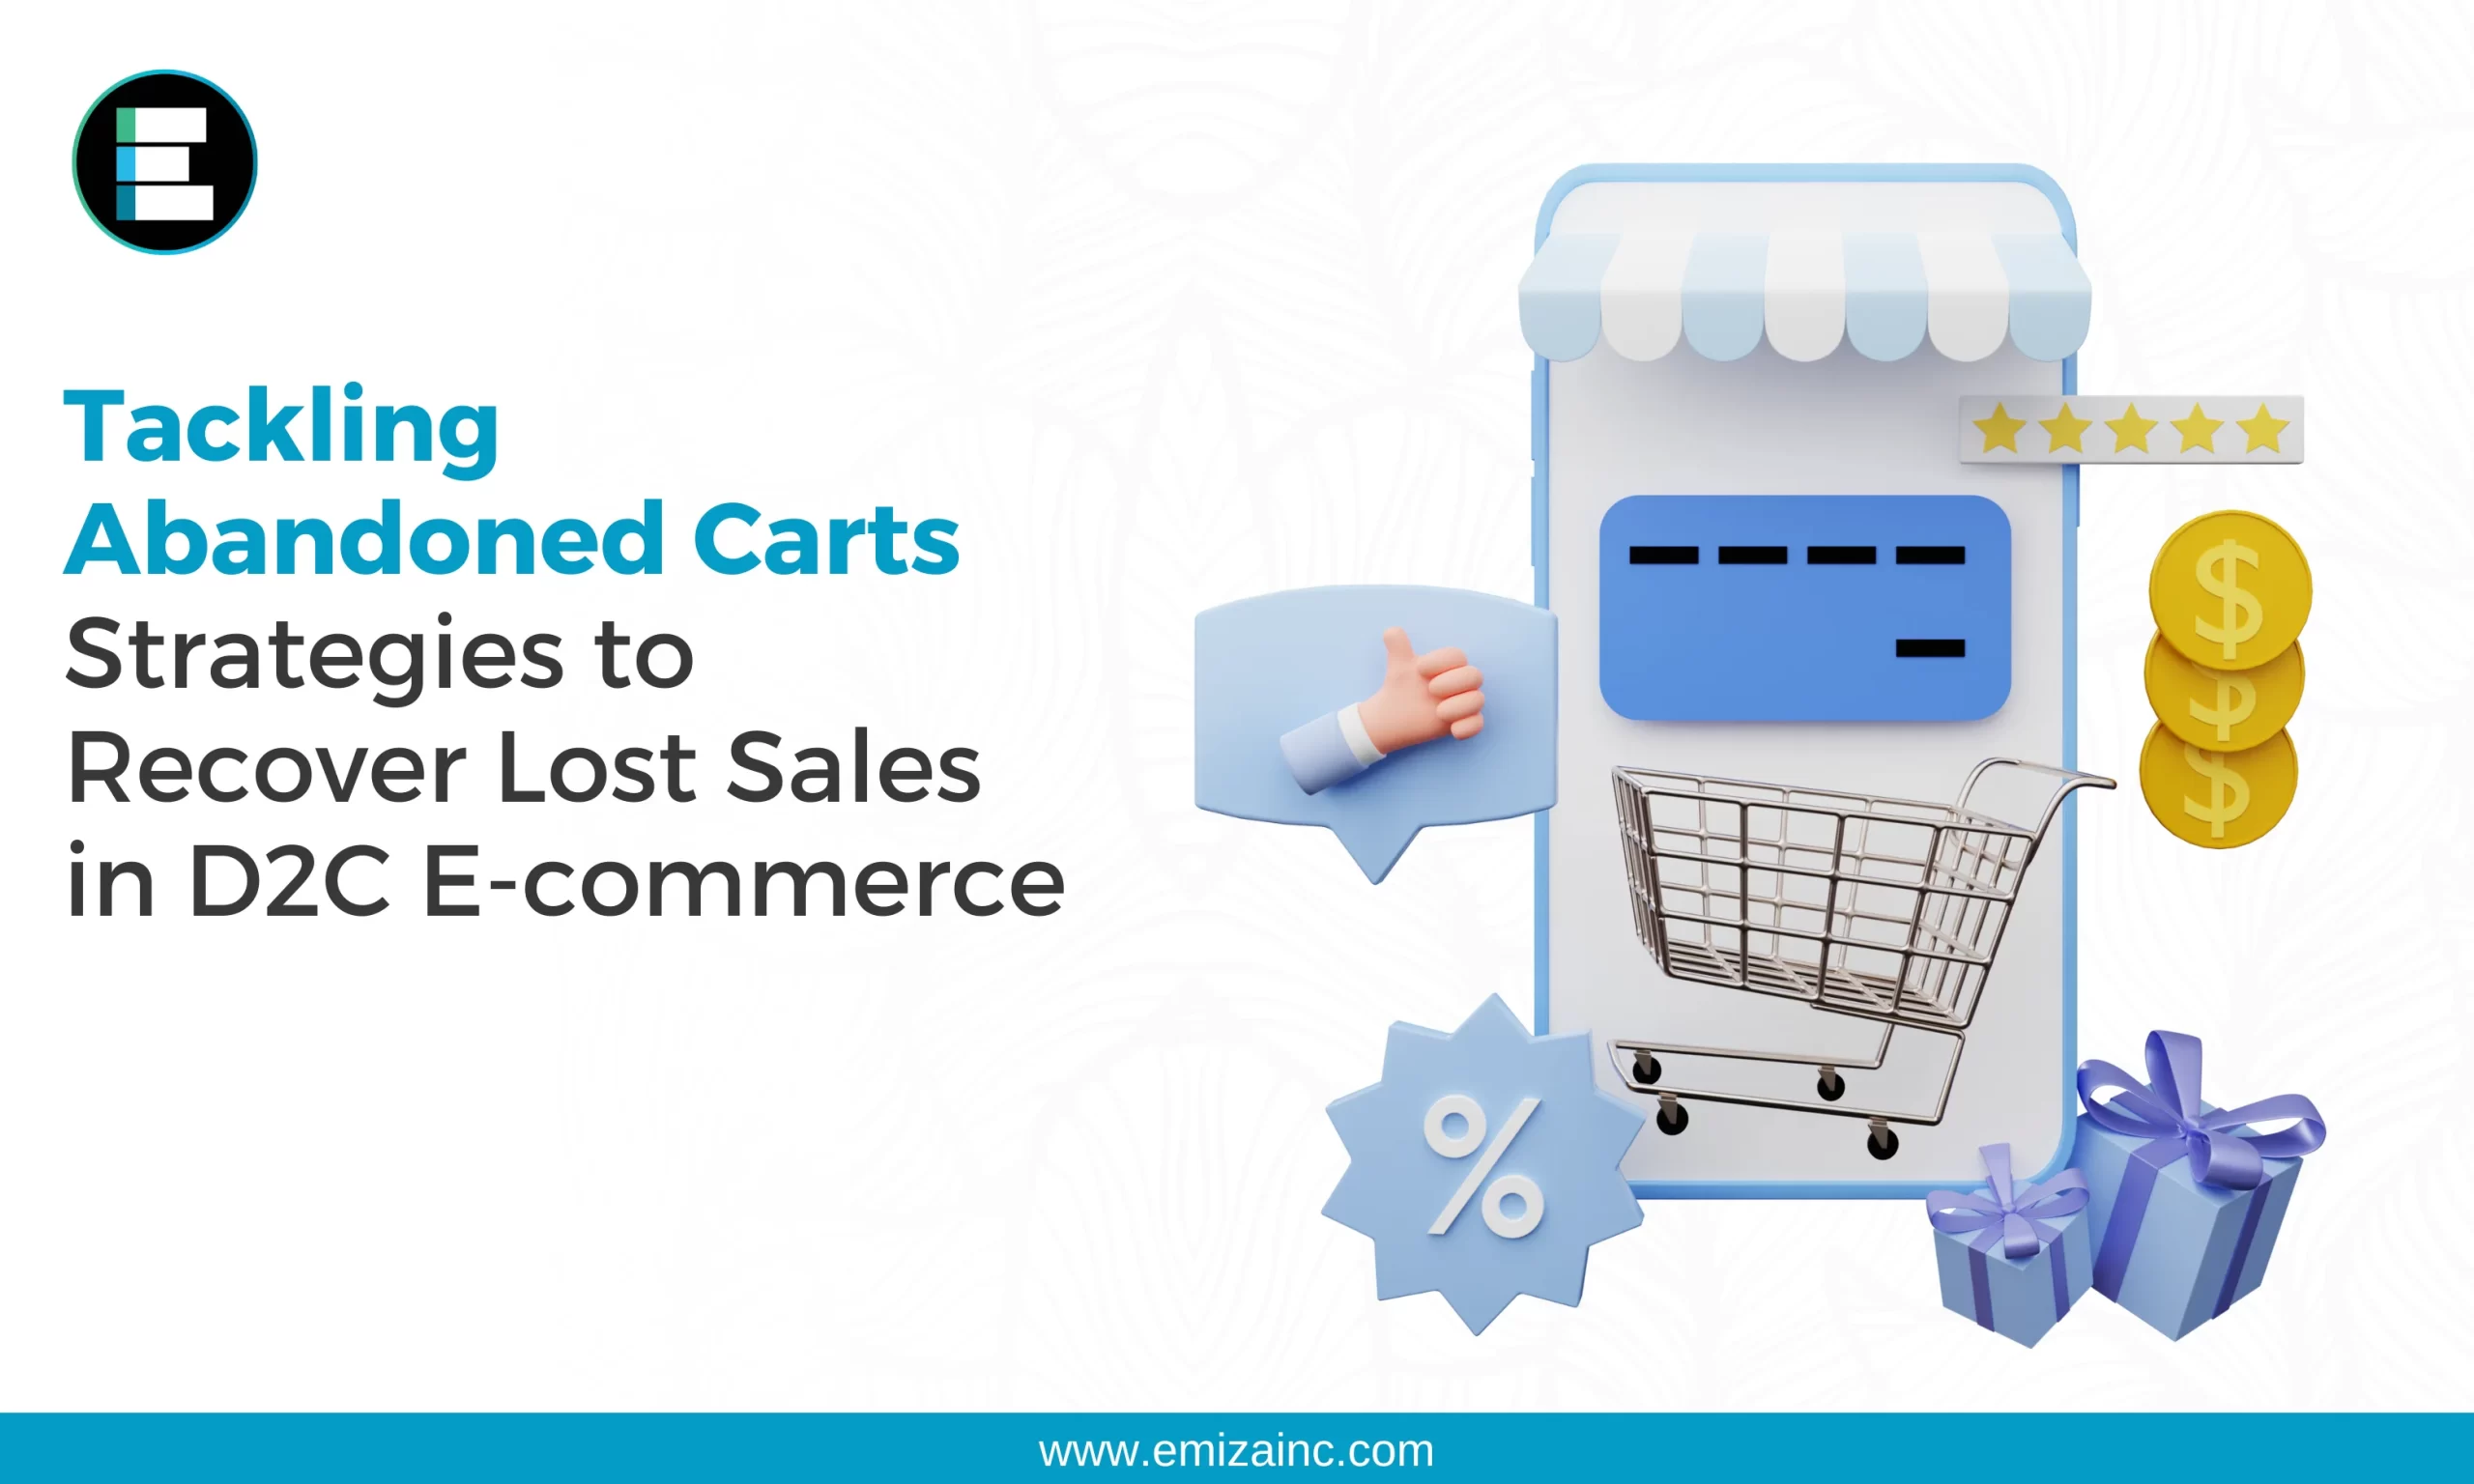 Tackling Abandoned Carts: Strategies to Recover Lost Sales in D2C E-commerce